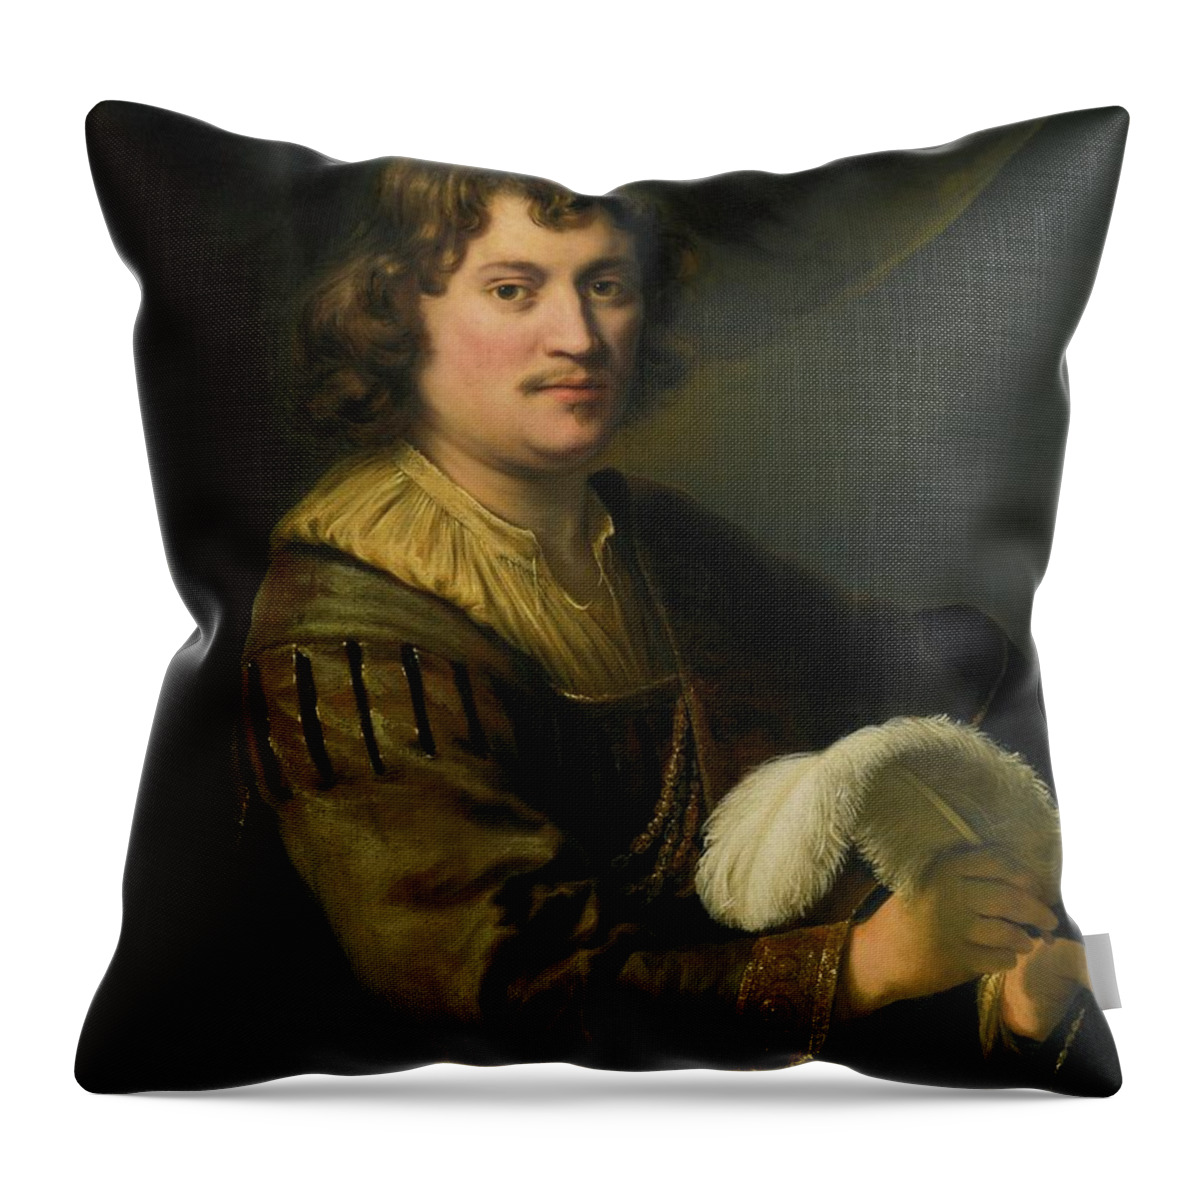 Ferdinand Bol Dordrecht 1616 - 1680 Amsterdam Portrait Of A Man Throw Pillow featuring the painting Portrait Of A Man #10 by MotionAge Designs